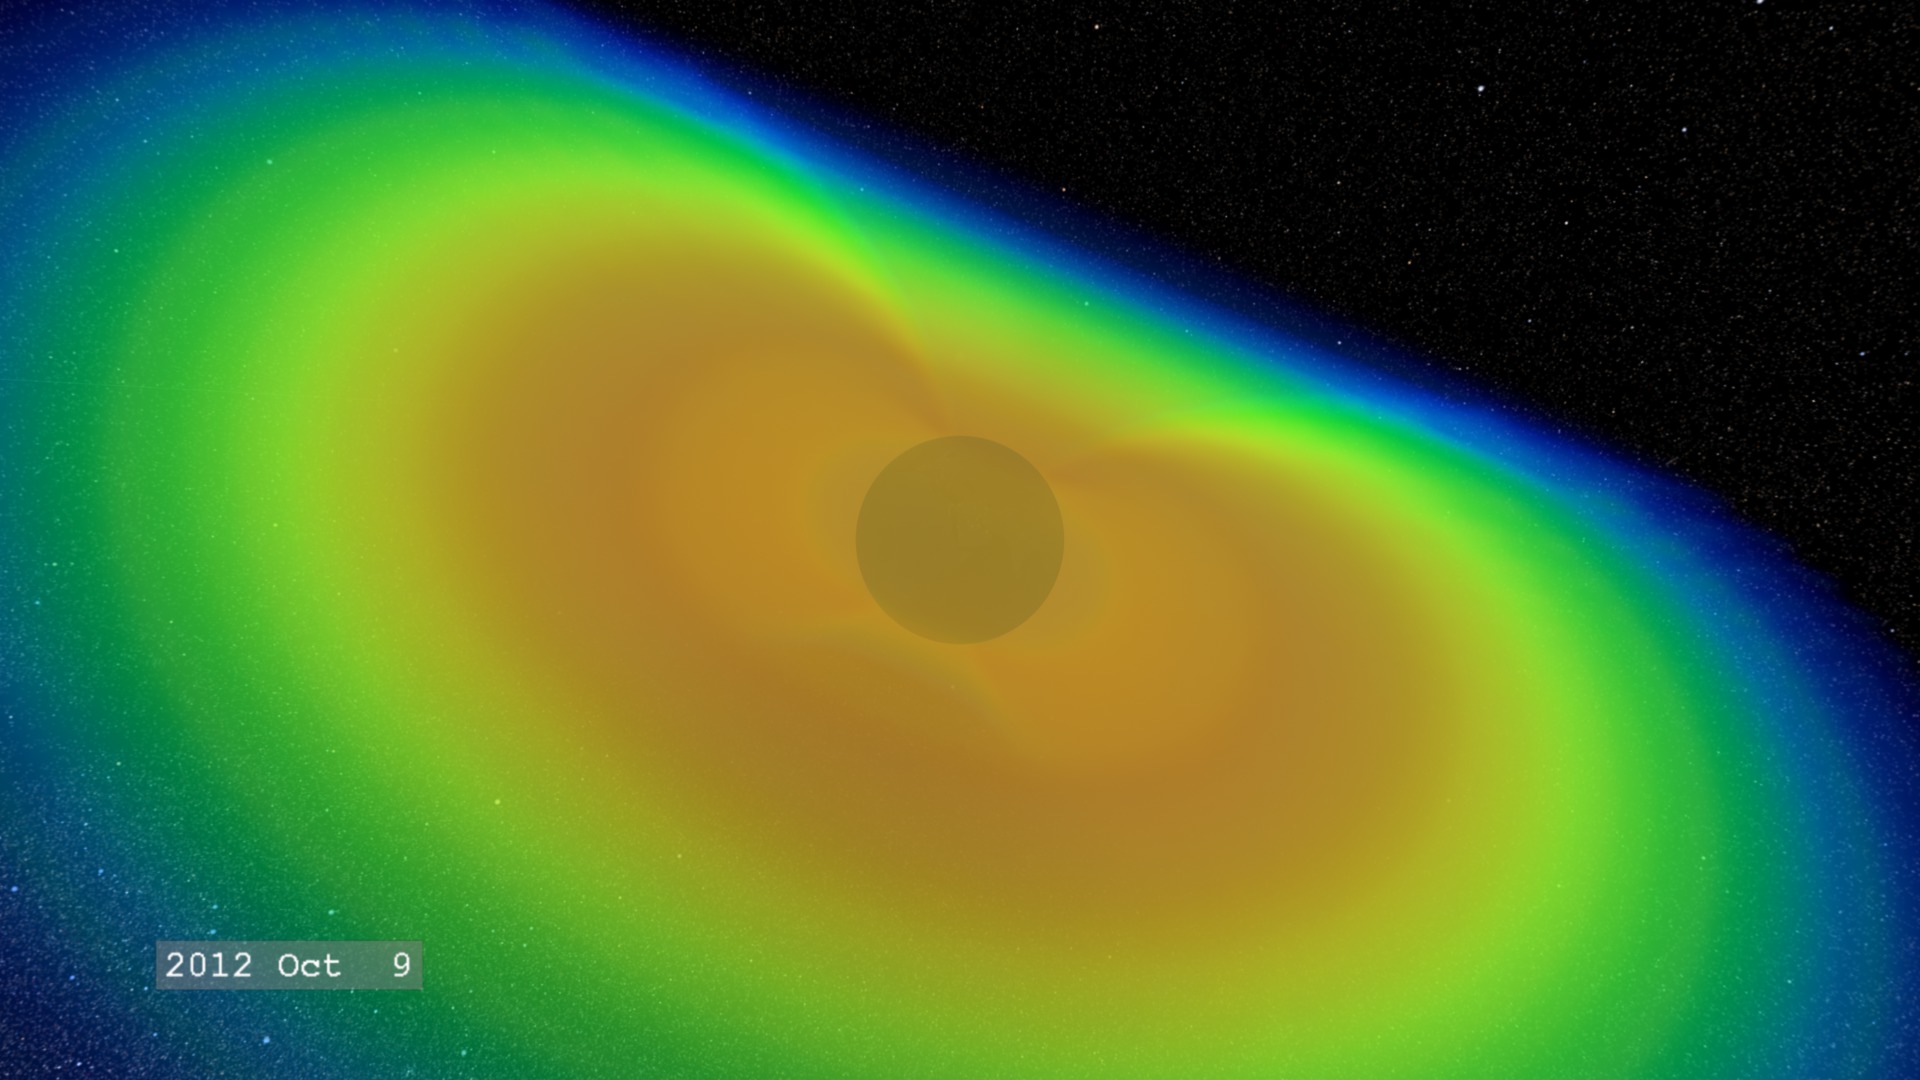 A side view of the Earth's radiation belt and its variation in time.